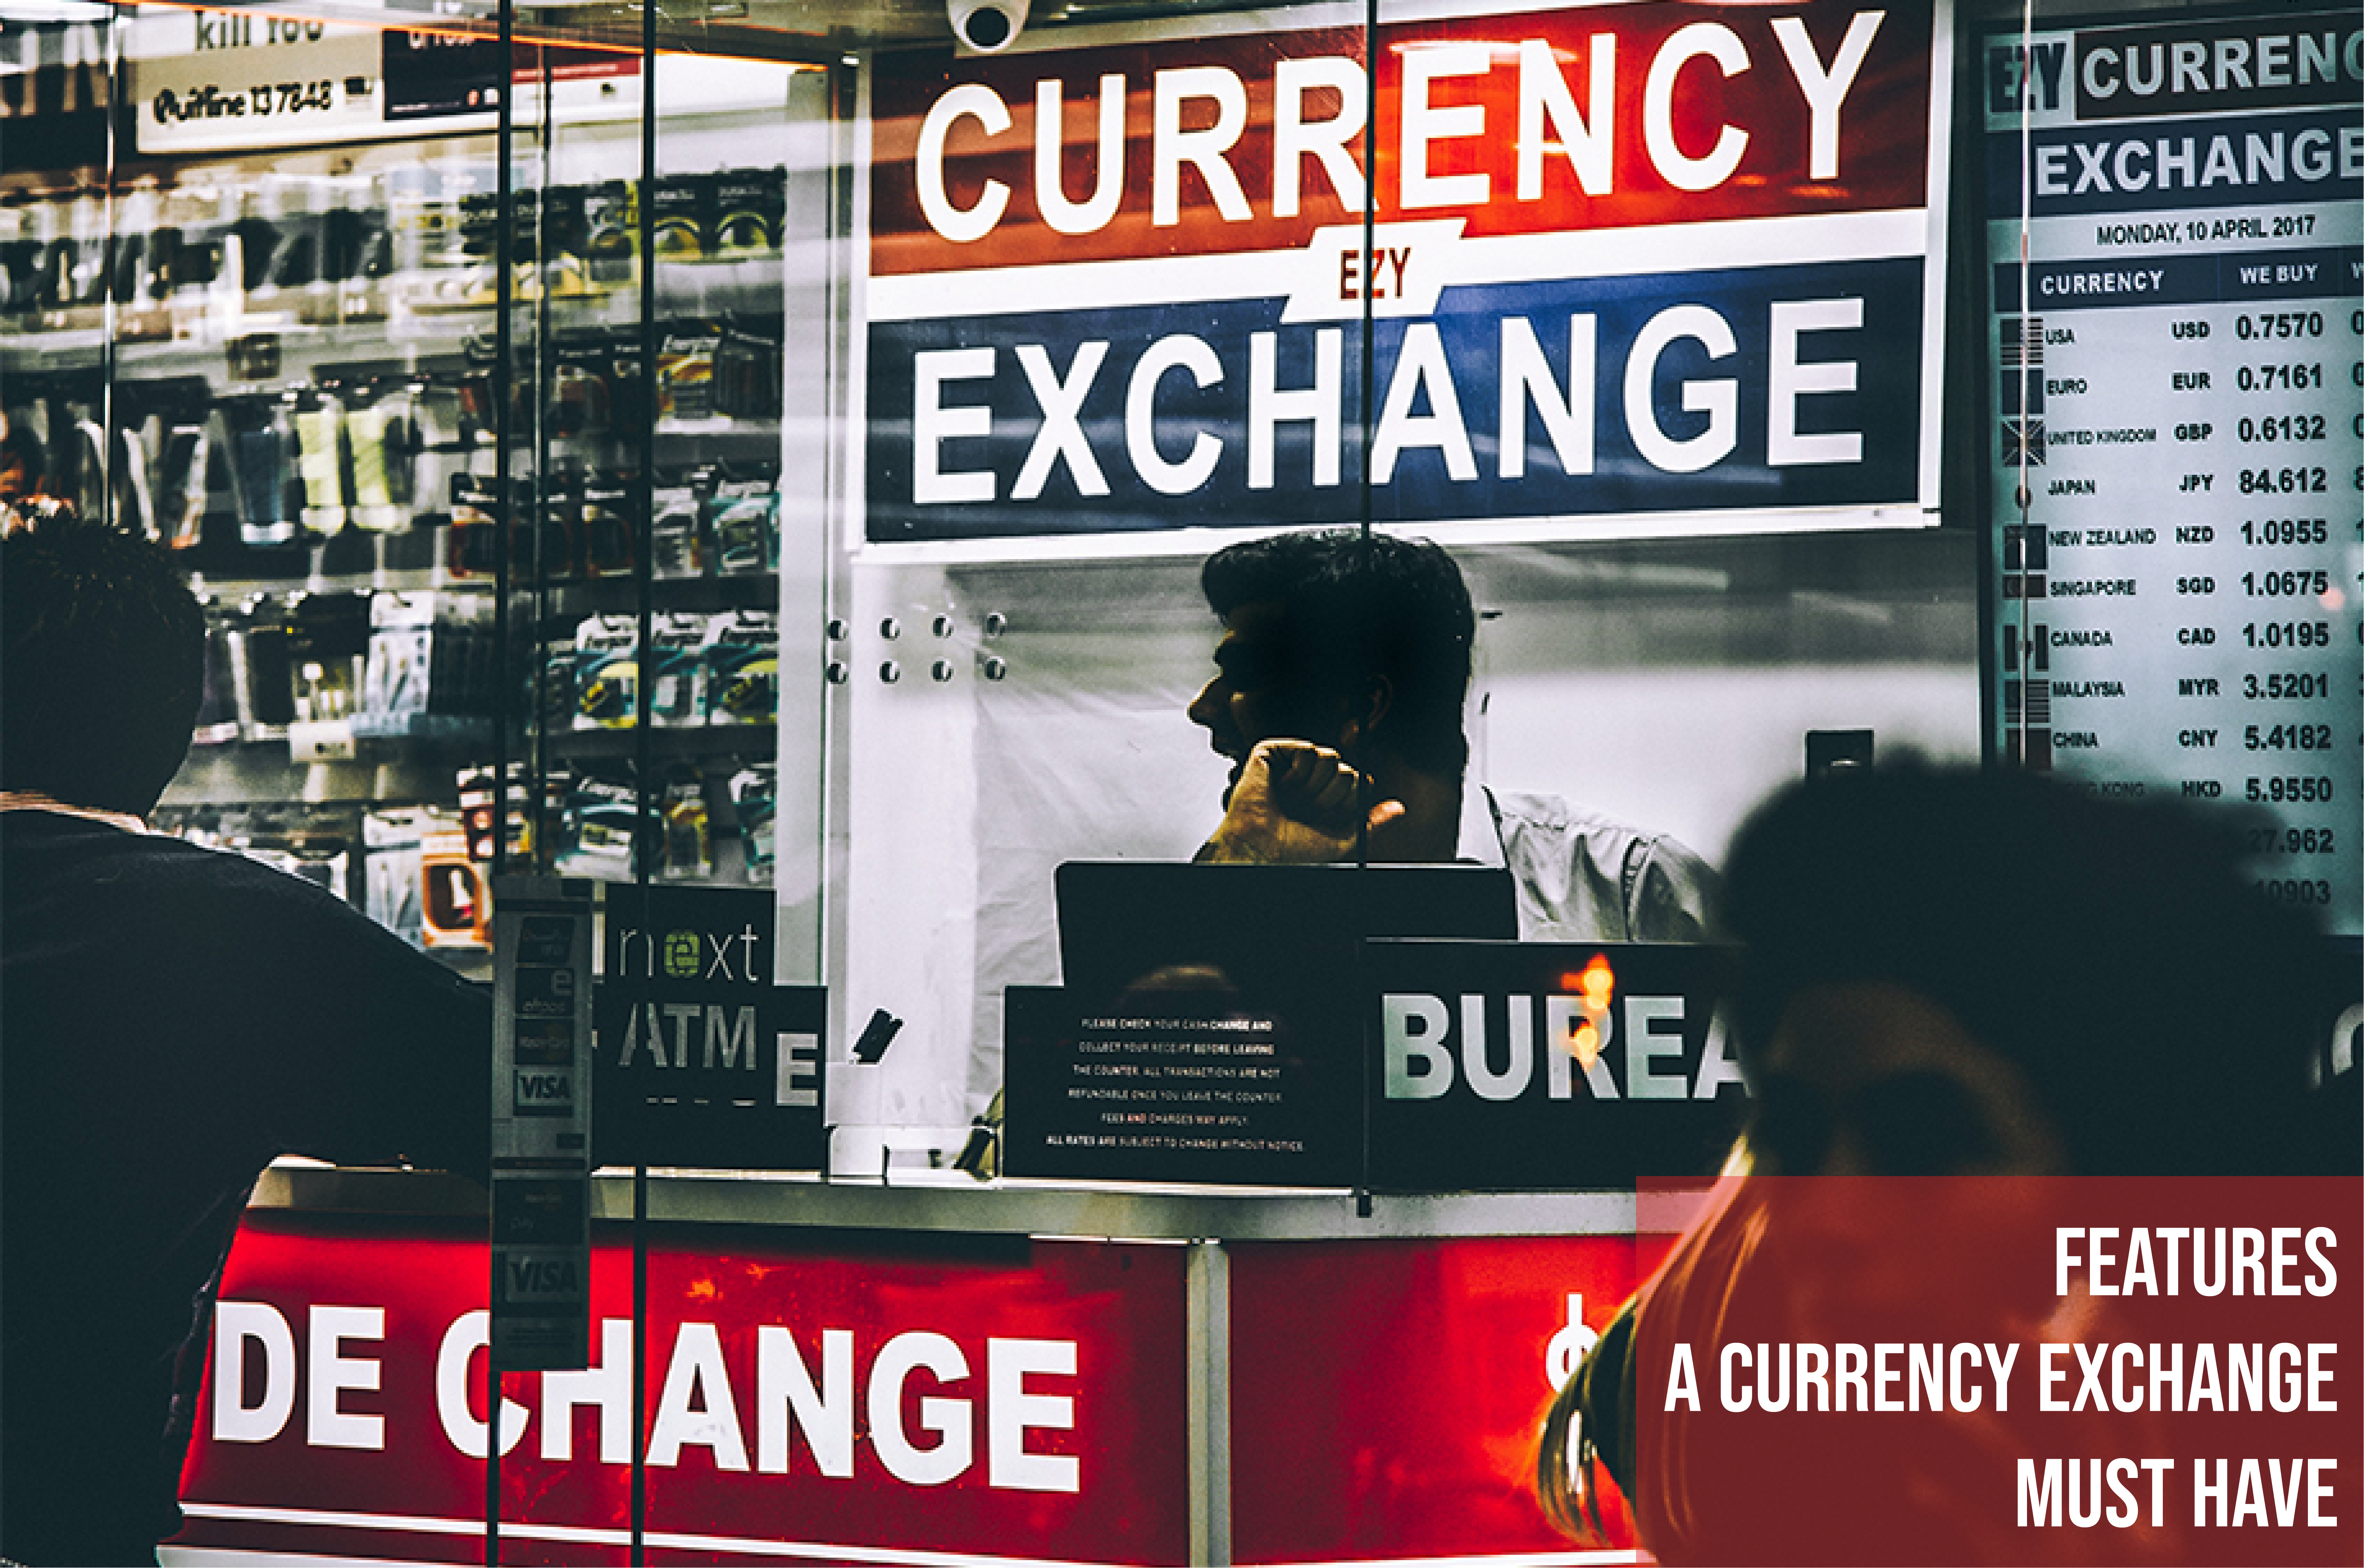 Top Currency Exchange Features to Look For